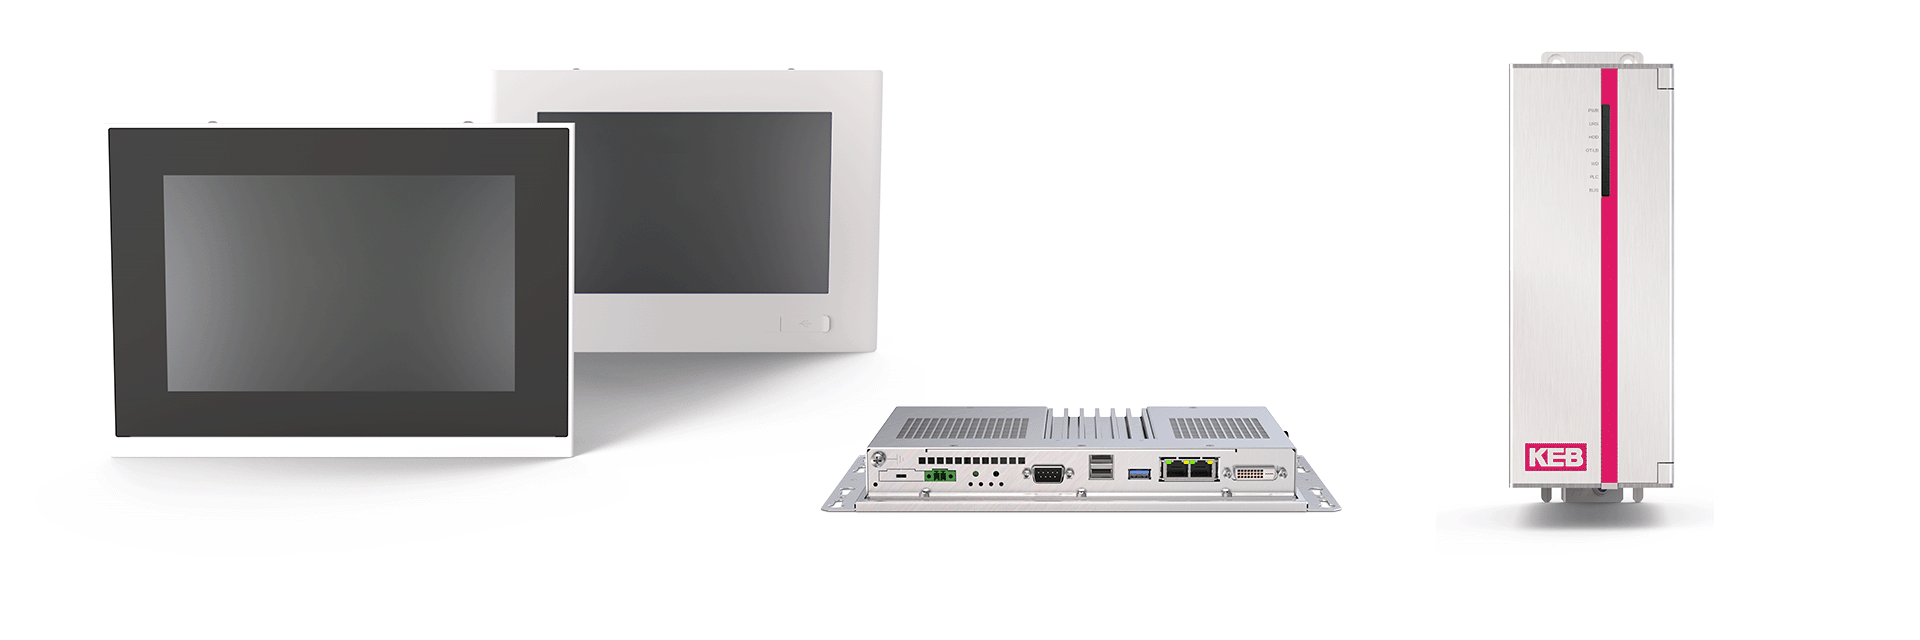 Industrial PC C6 E22 in panel, box and book mount design